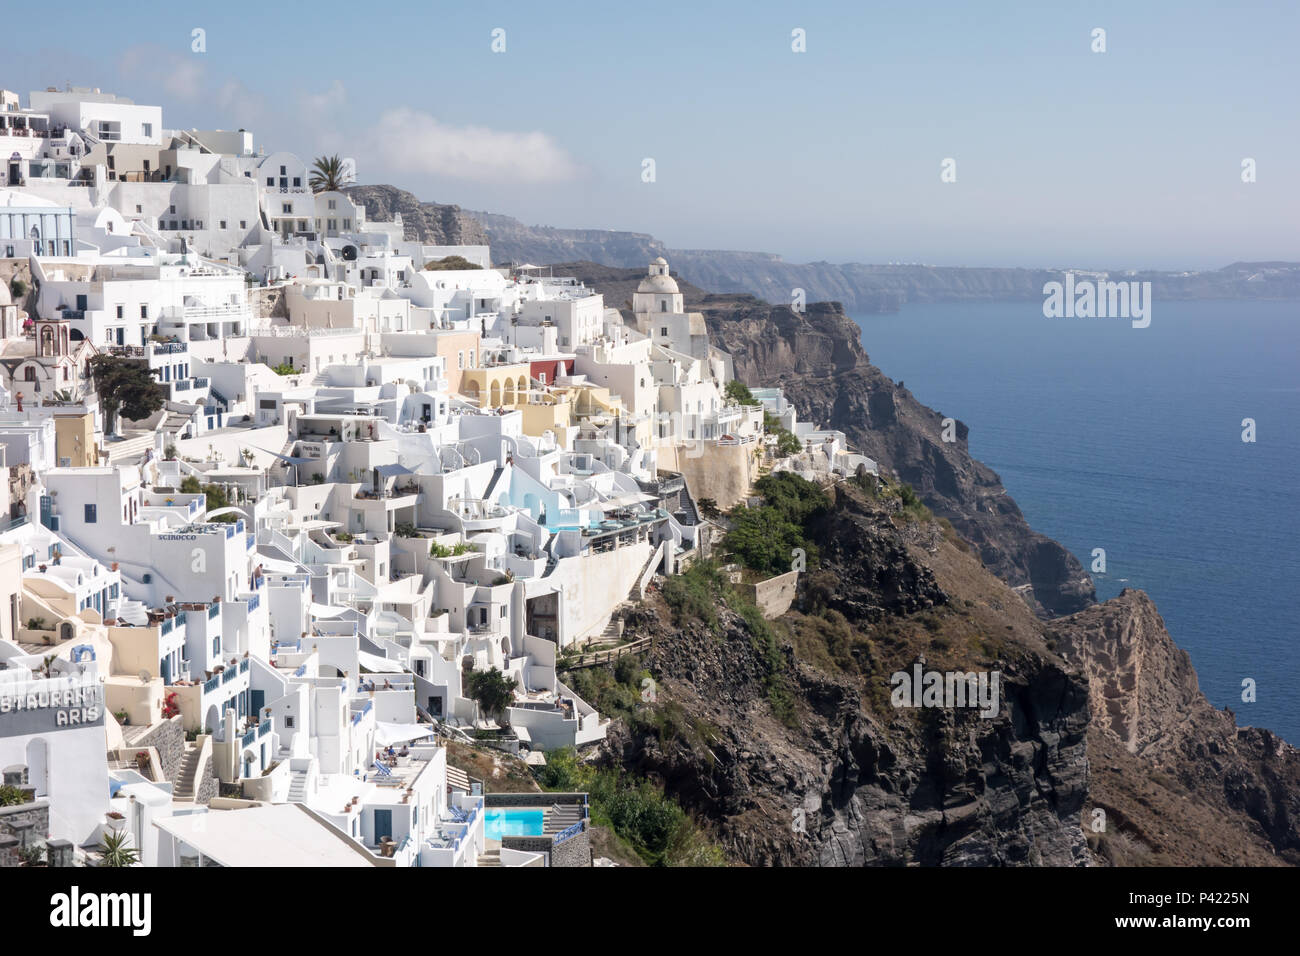 SANTORNI, GREECE - 14th May 2018: Traditional white houses of Thira that overlooks the Mediterranean Sea. Stock Photo